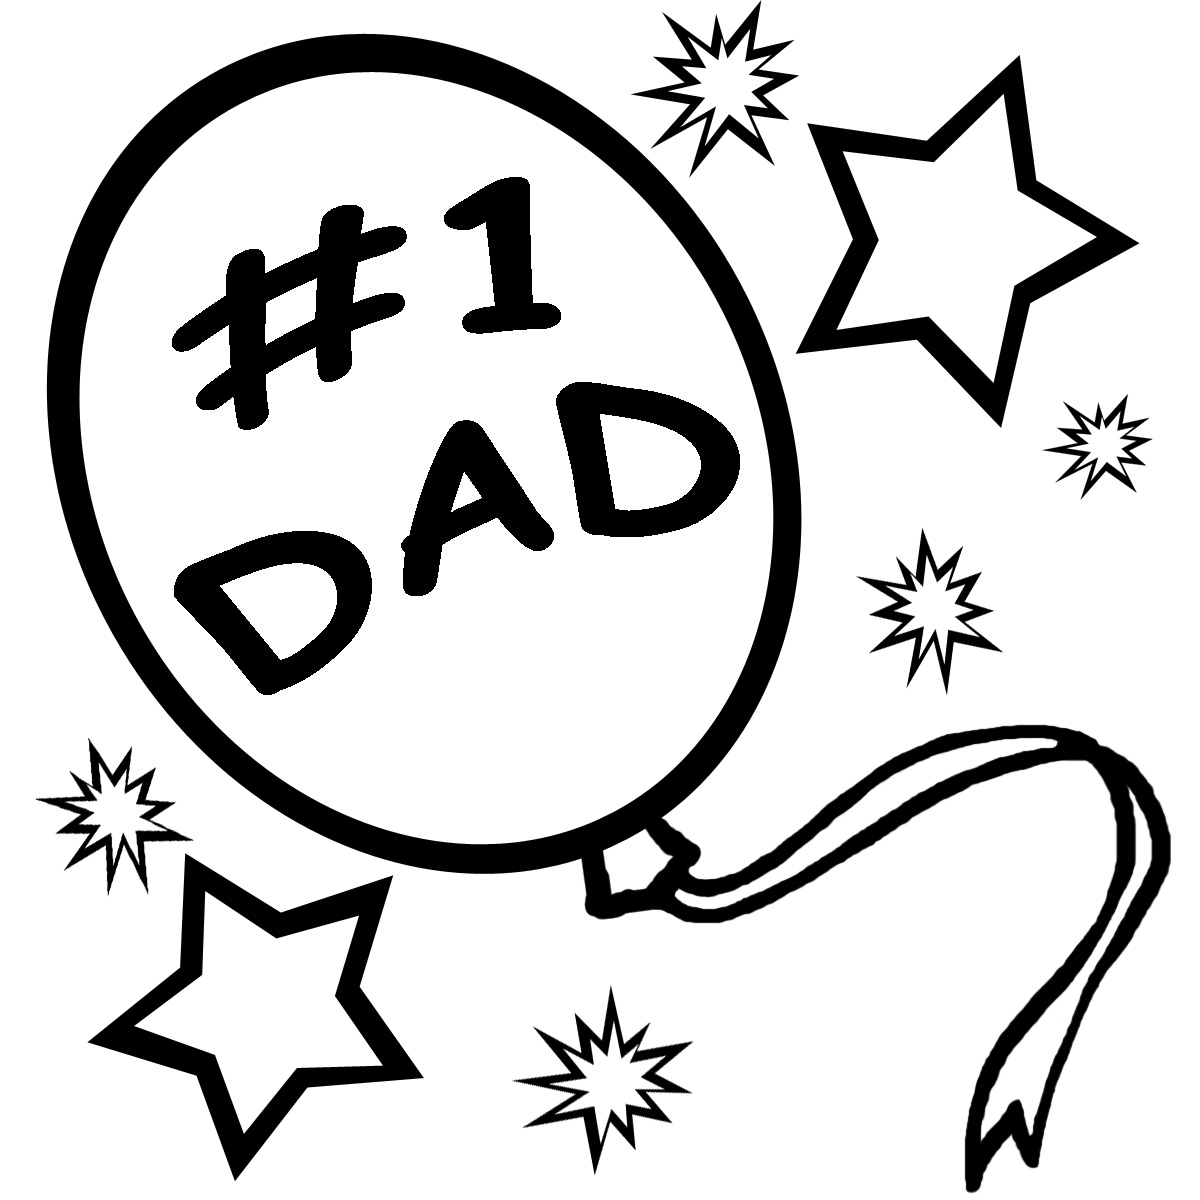 Fathers day free father clip art clipart image 2.